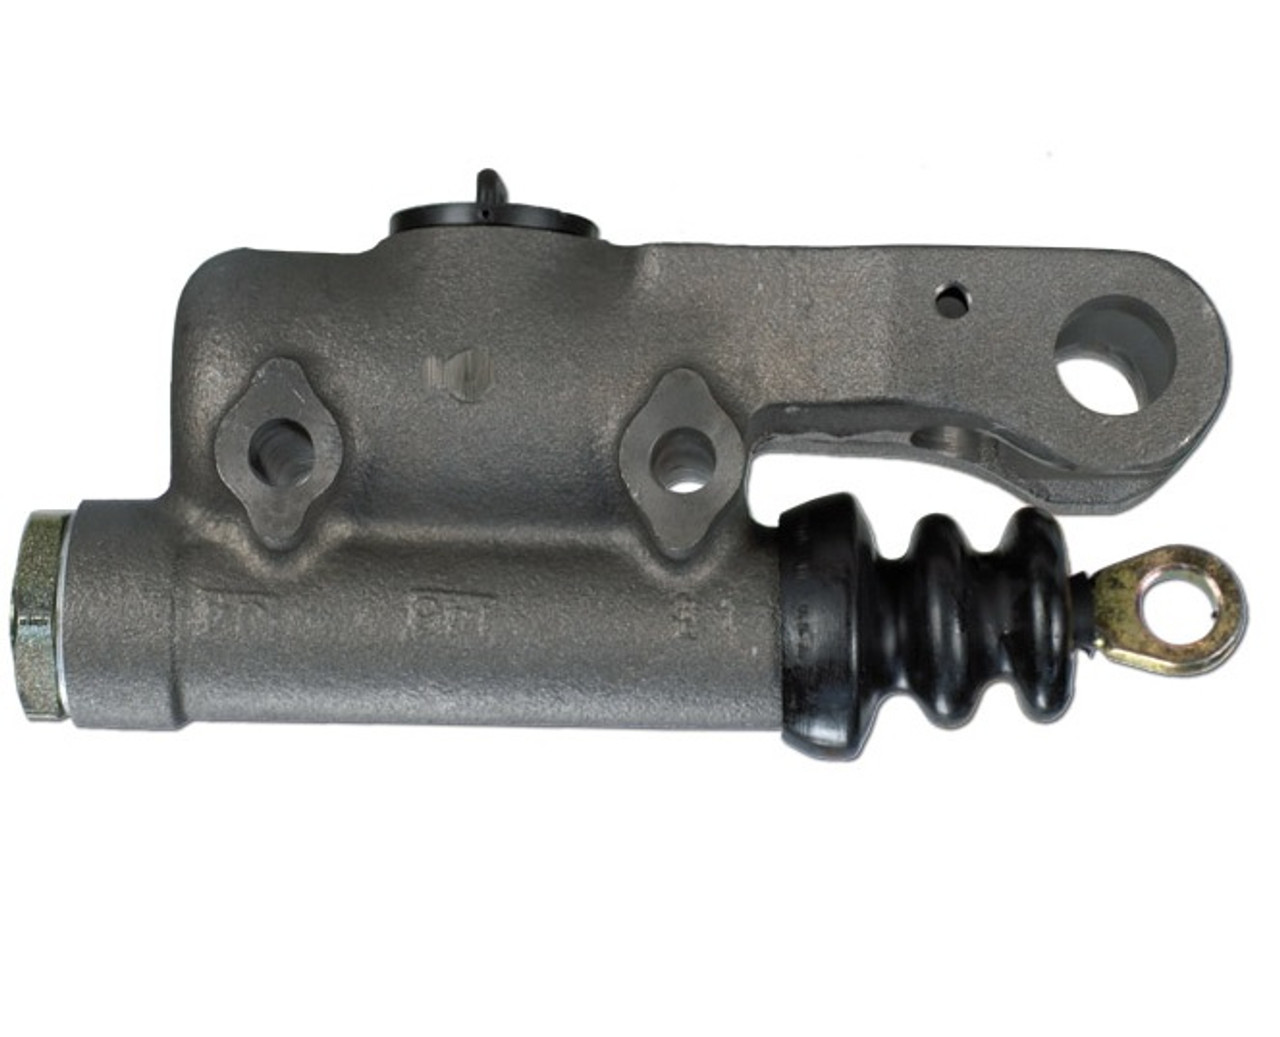 Master Cylinder Original Type. Fits 1955-59 Chevy GMC Pickup 1/2 Ton ea.